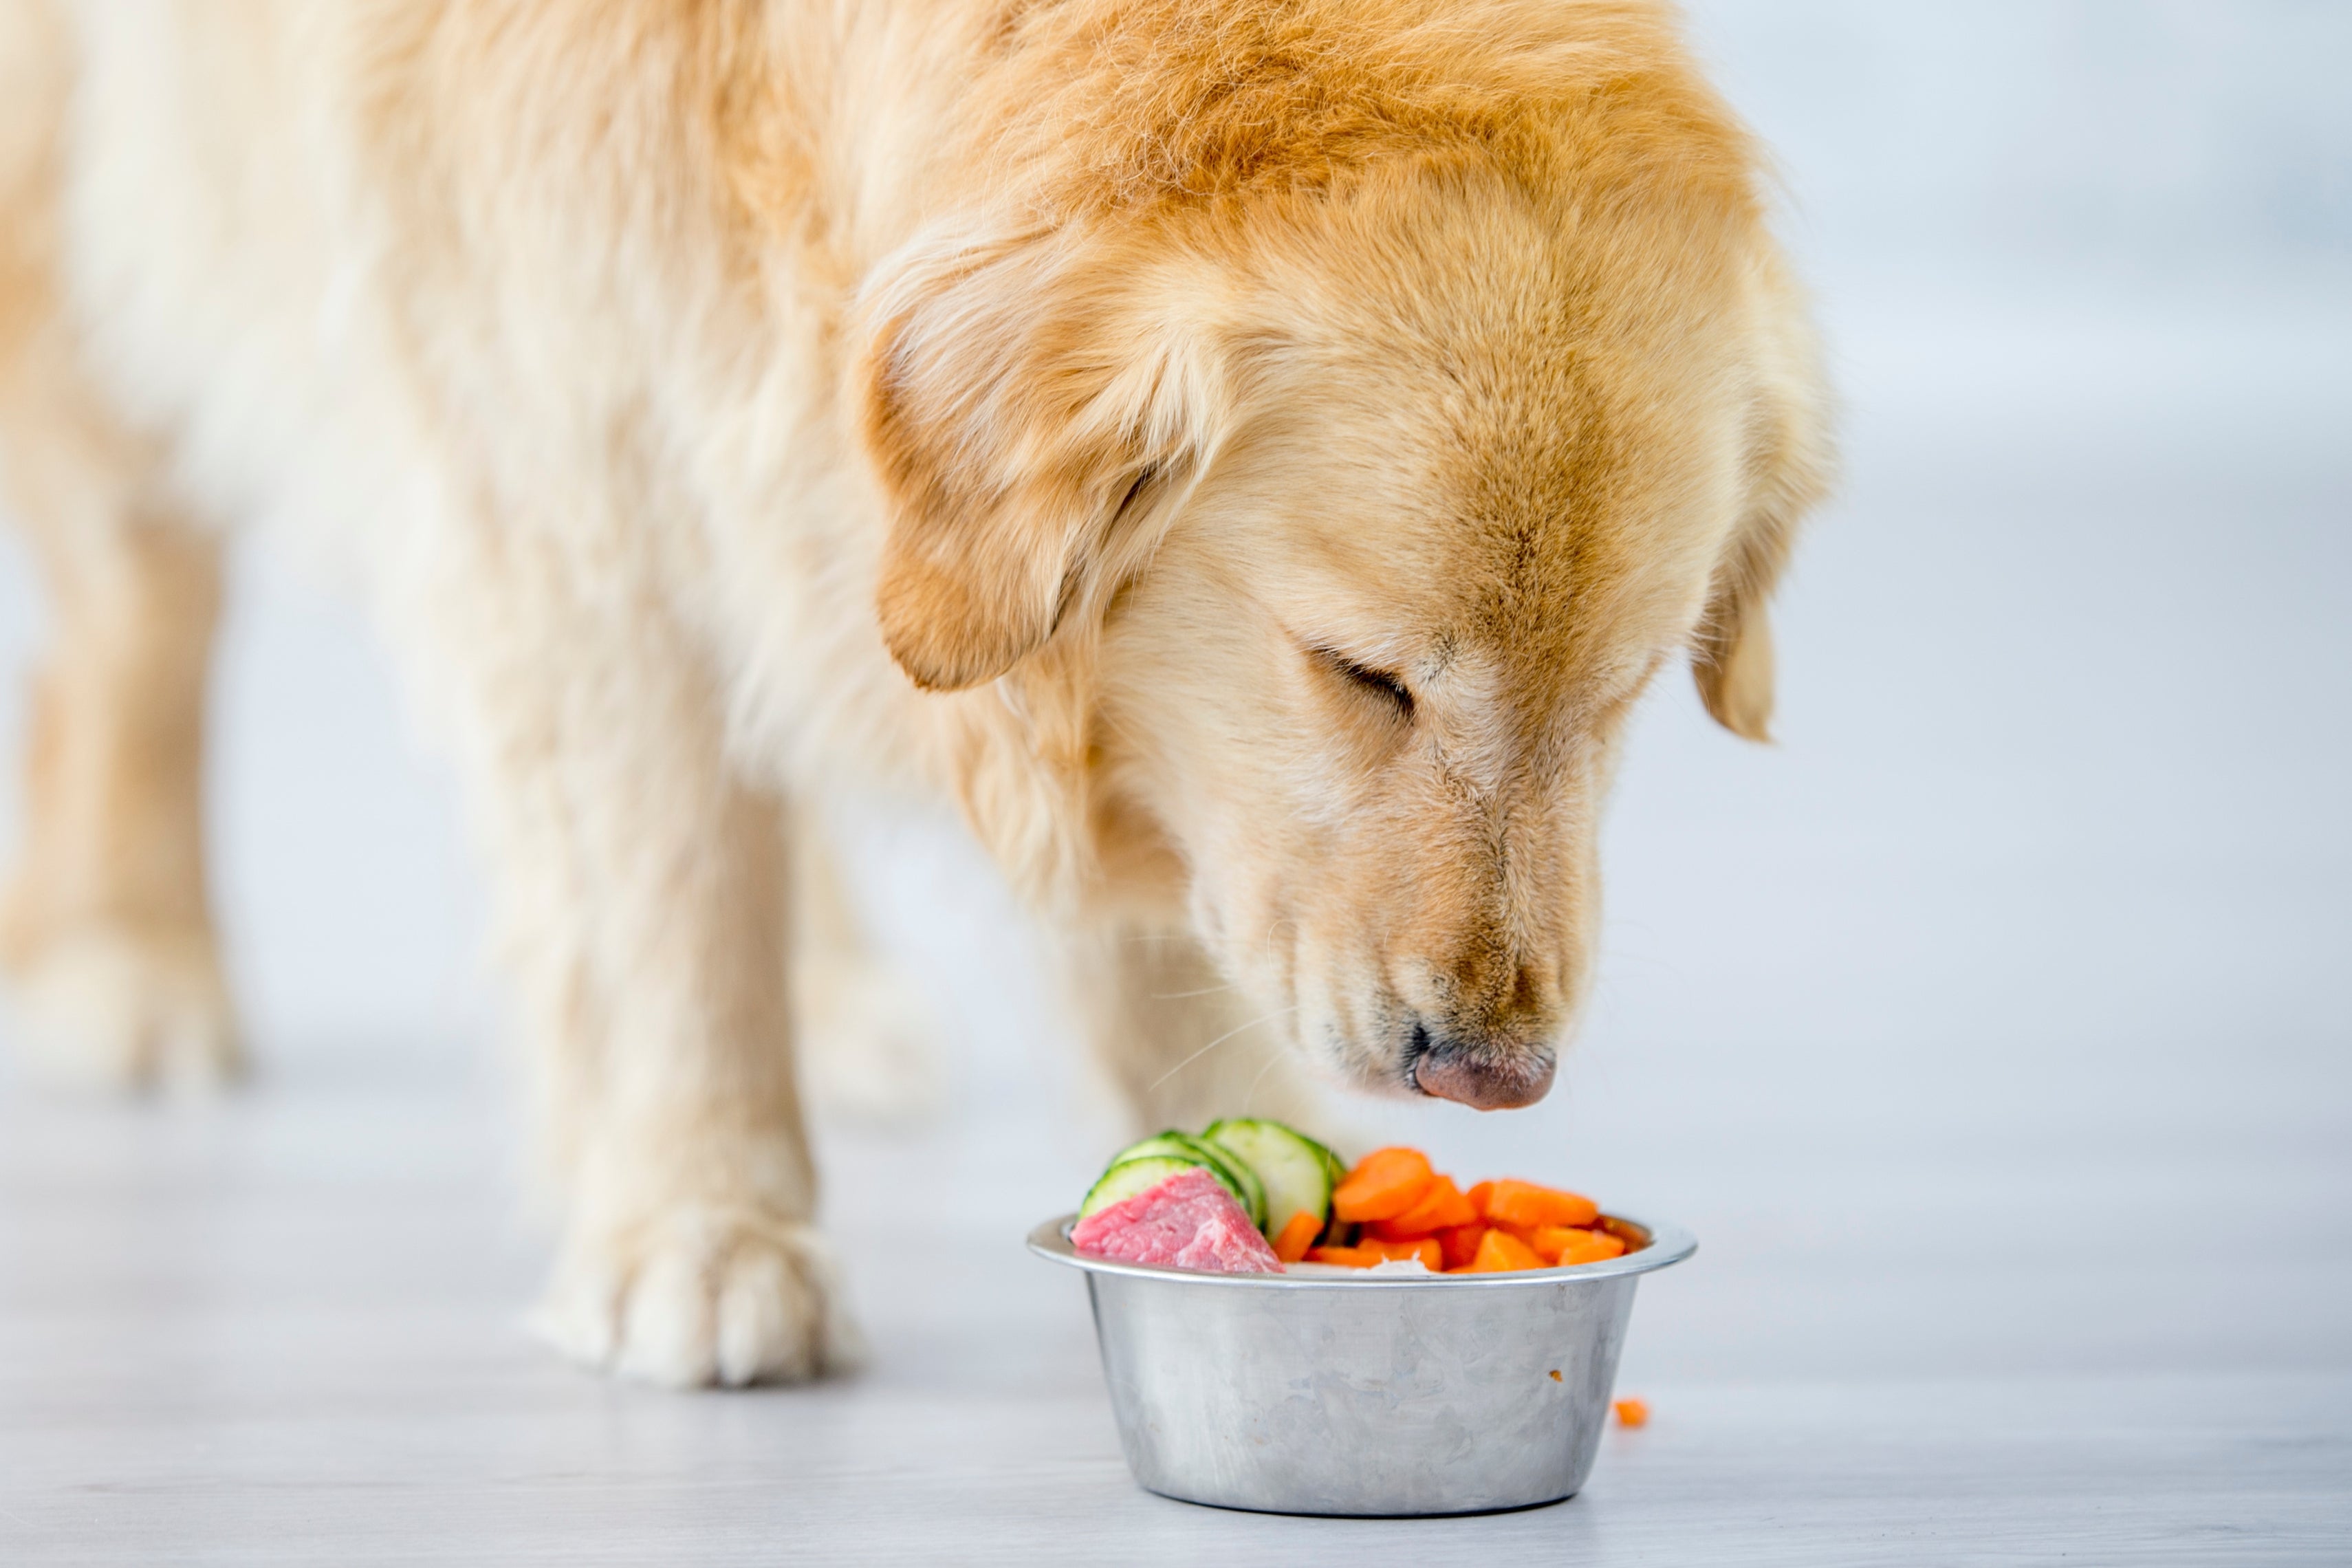 The Vegetables Your Dog Can and Can't Eat